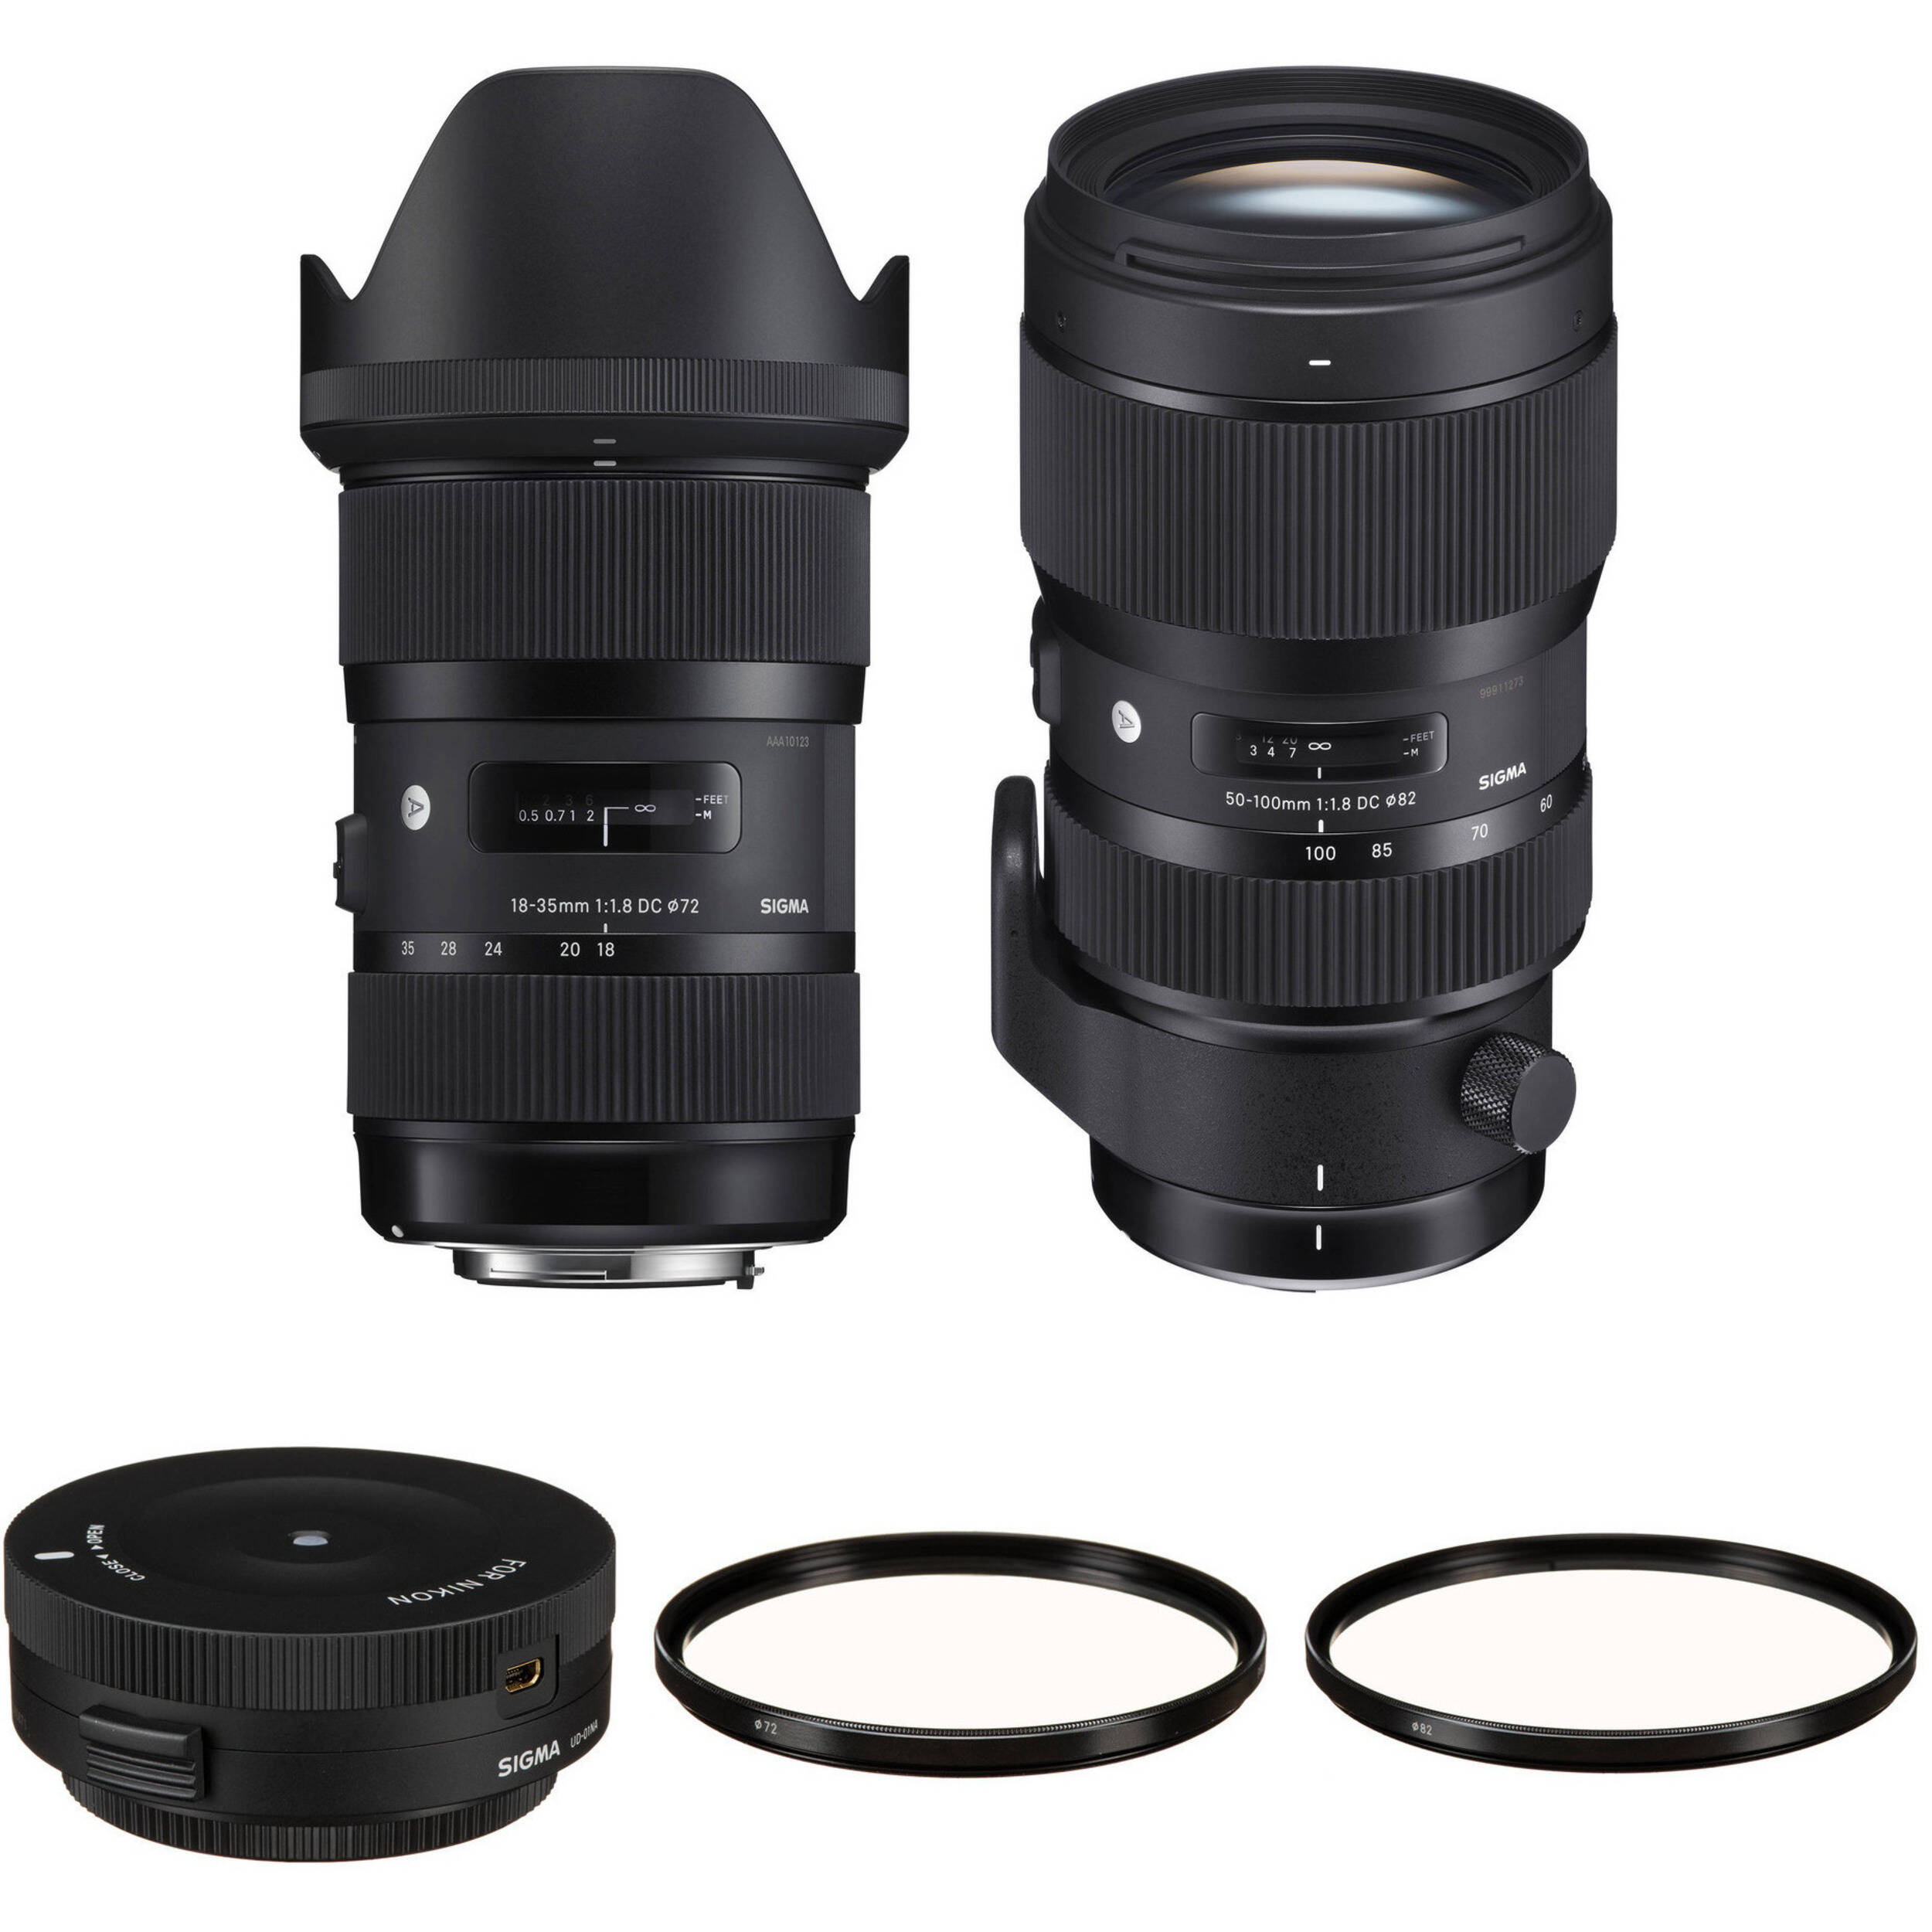 Sigma 18 35mm F 1 8 And 50 100mm F 1 8 Dc Hsm Art Lenses Kit For